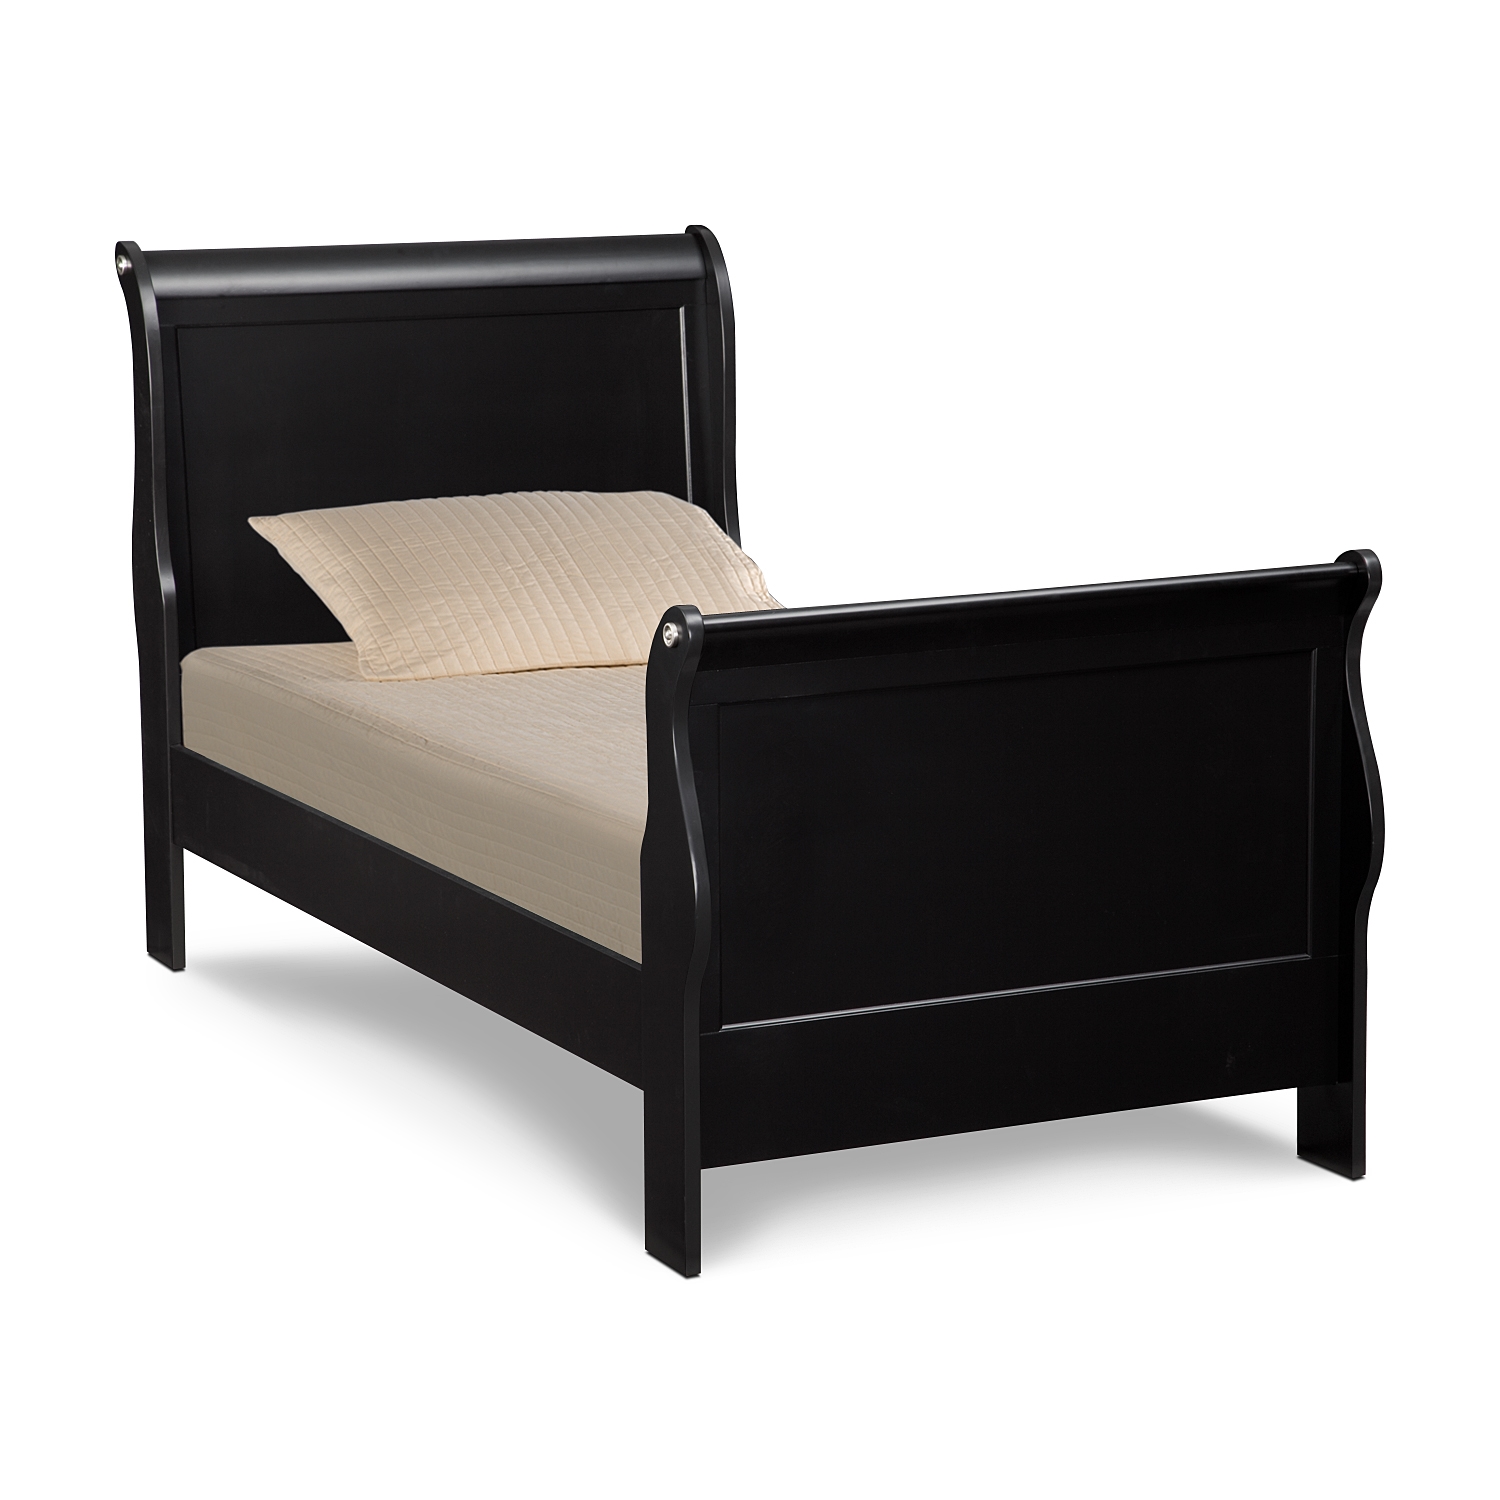 black twin beds for kids photo - 8